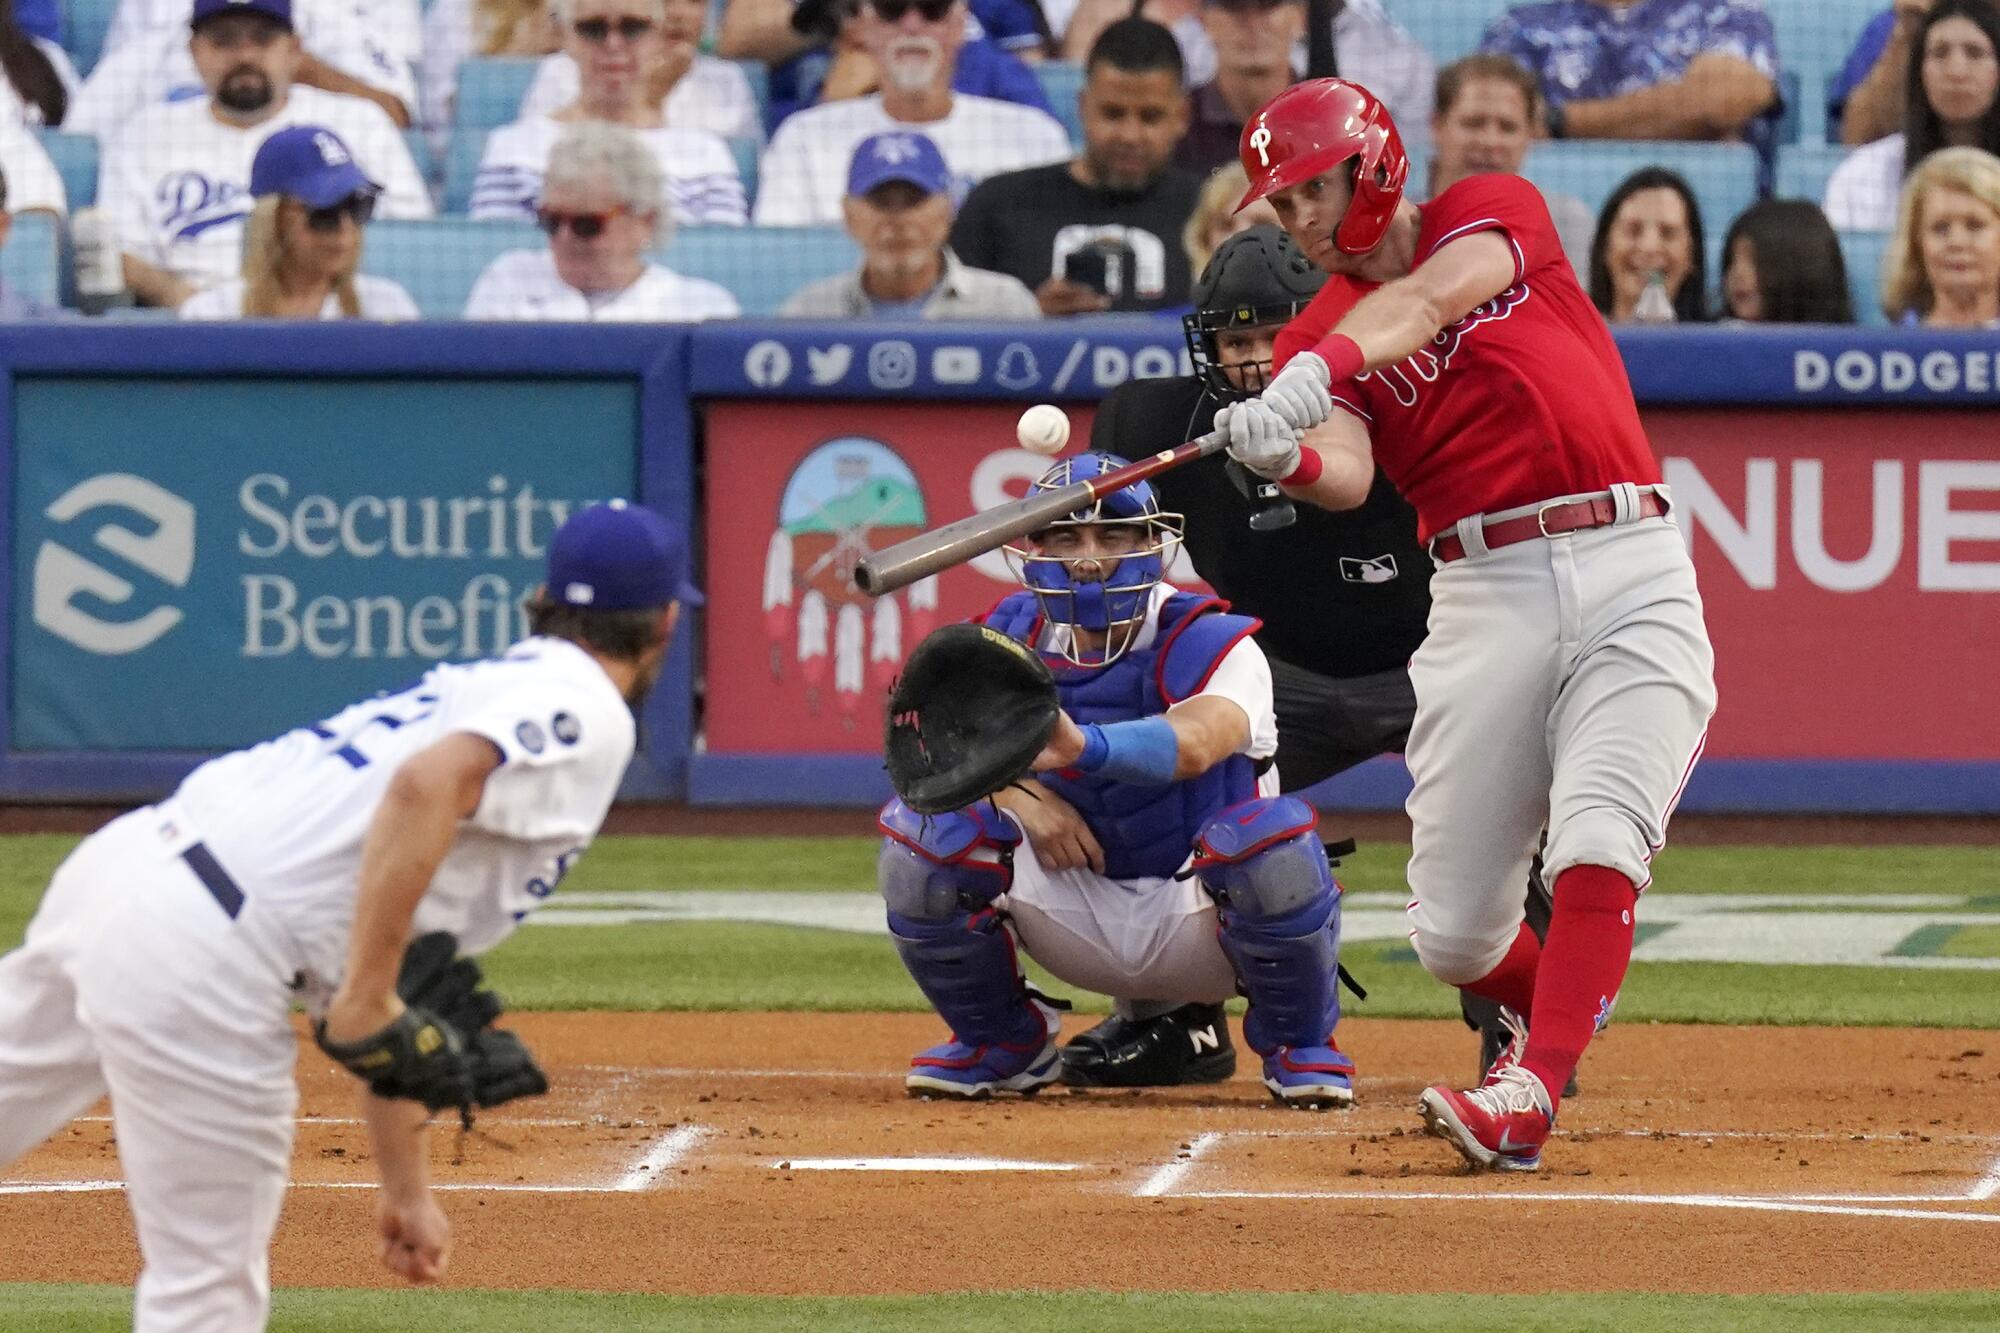 Philadelphia's Rhys Hoskins hits a solo home run off Dodgers starting pitcher Clayton Kershaw.